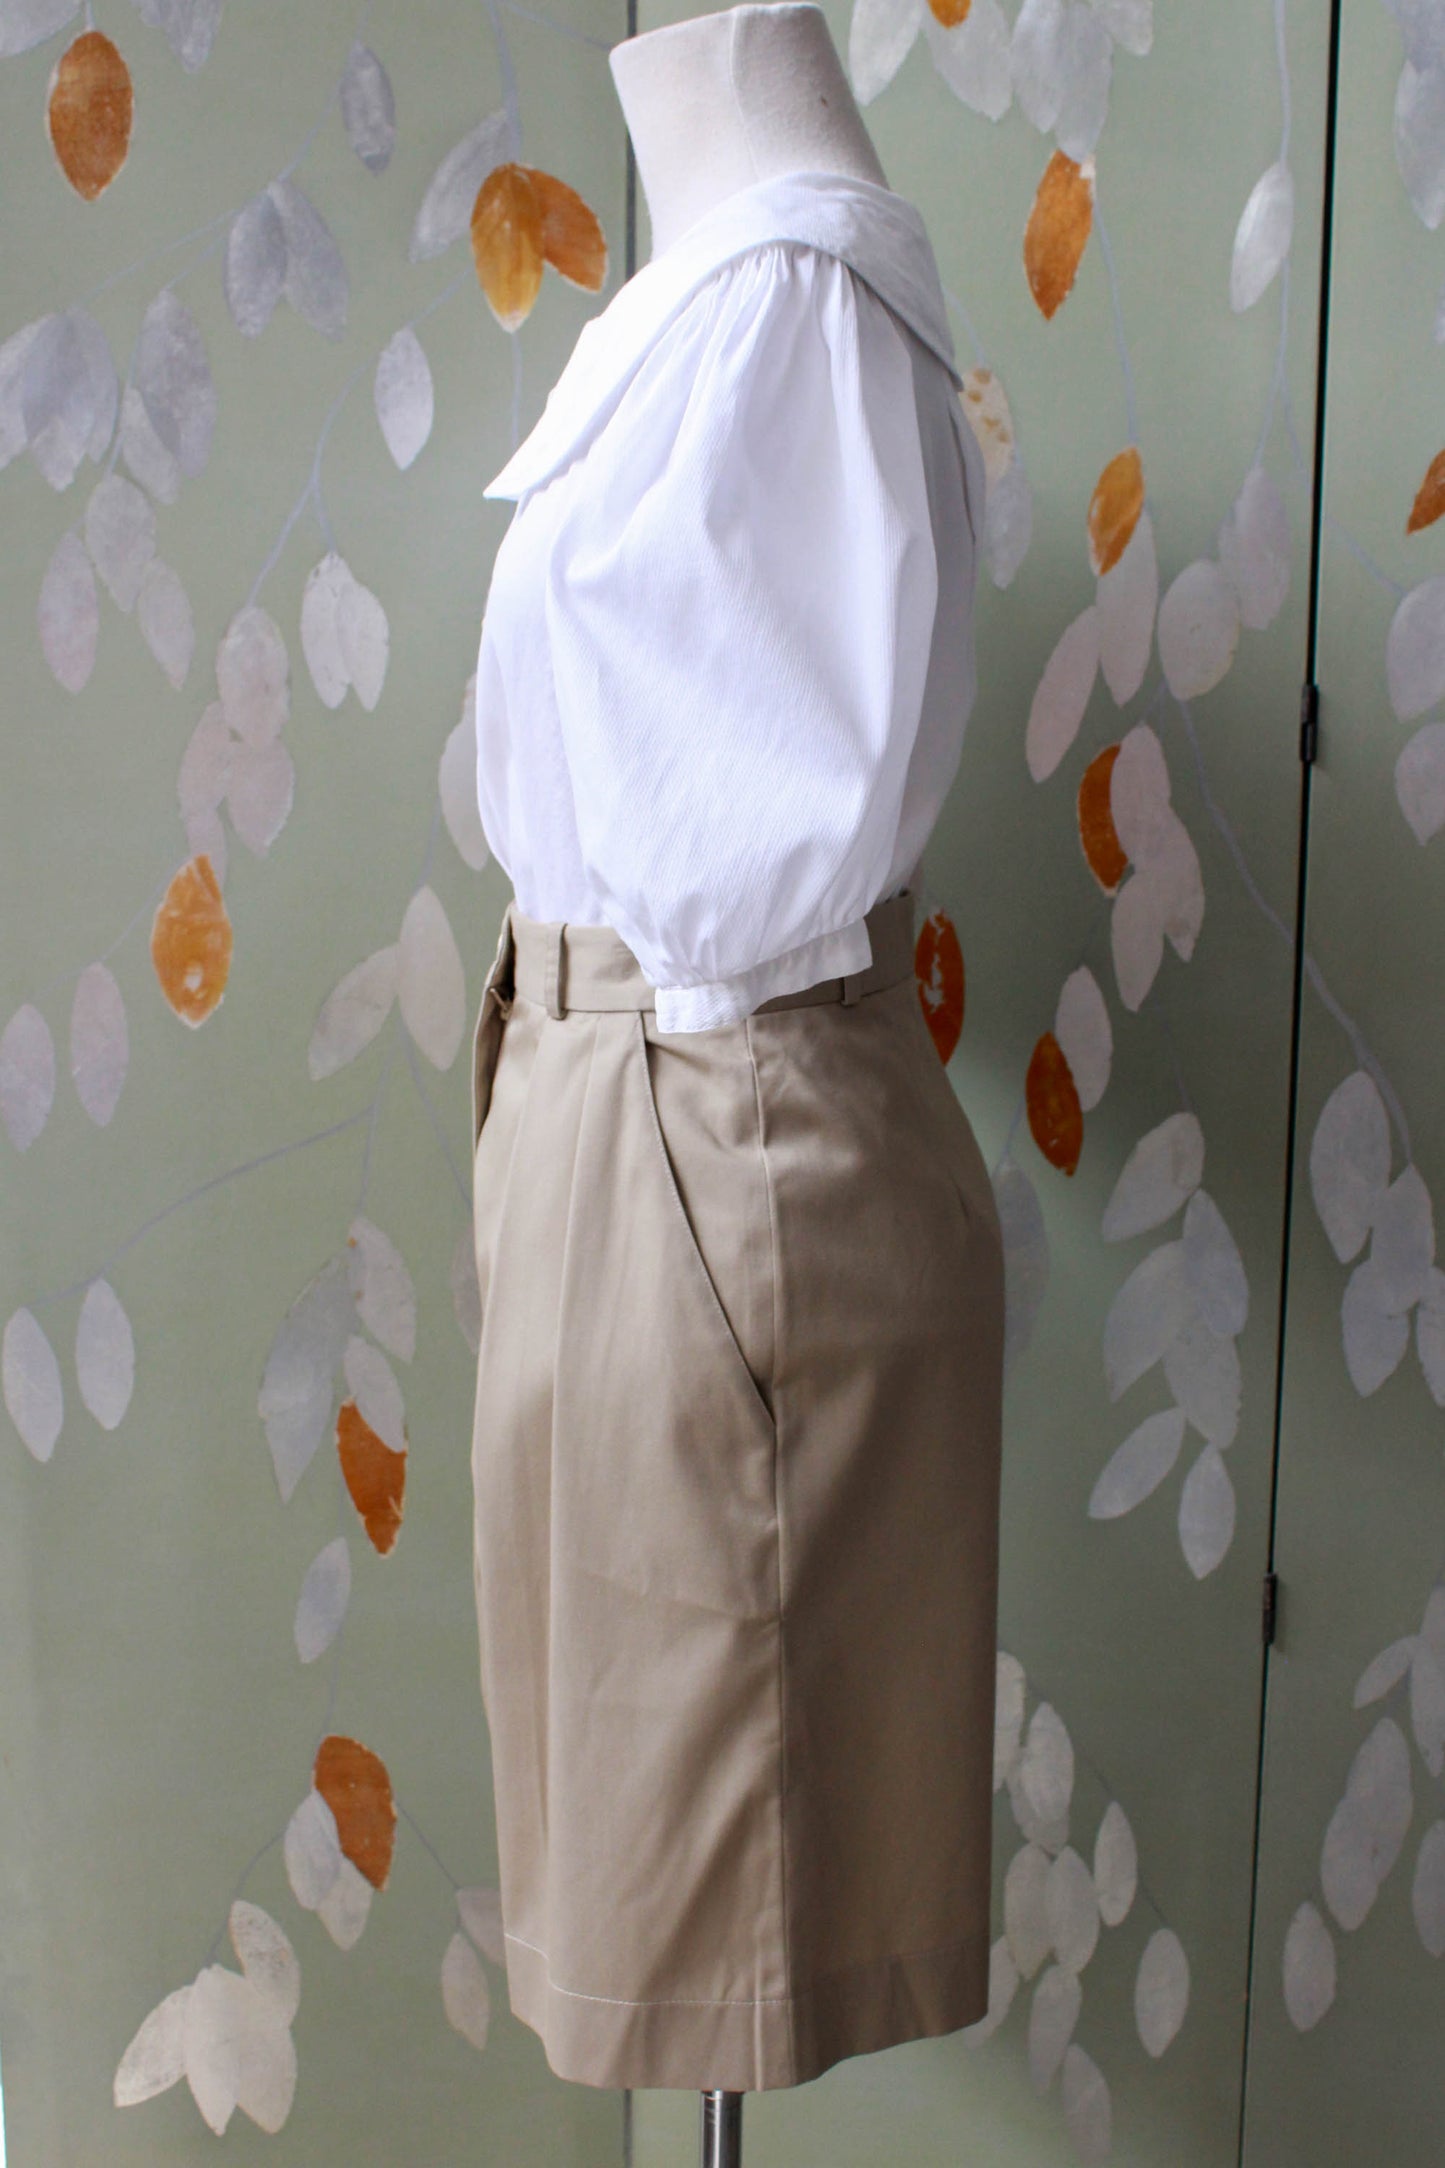 1980s cotton khaki long shorts with high waist, tailored pleated waist shorts, for office/work appropriate side pockets and belt loops